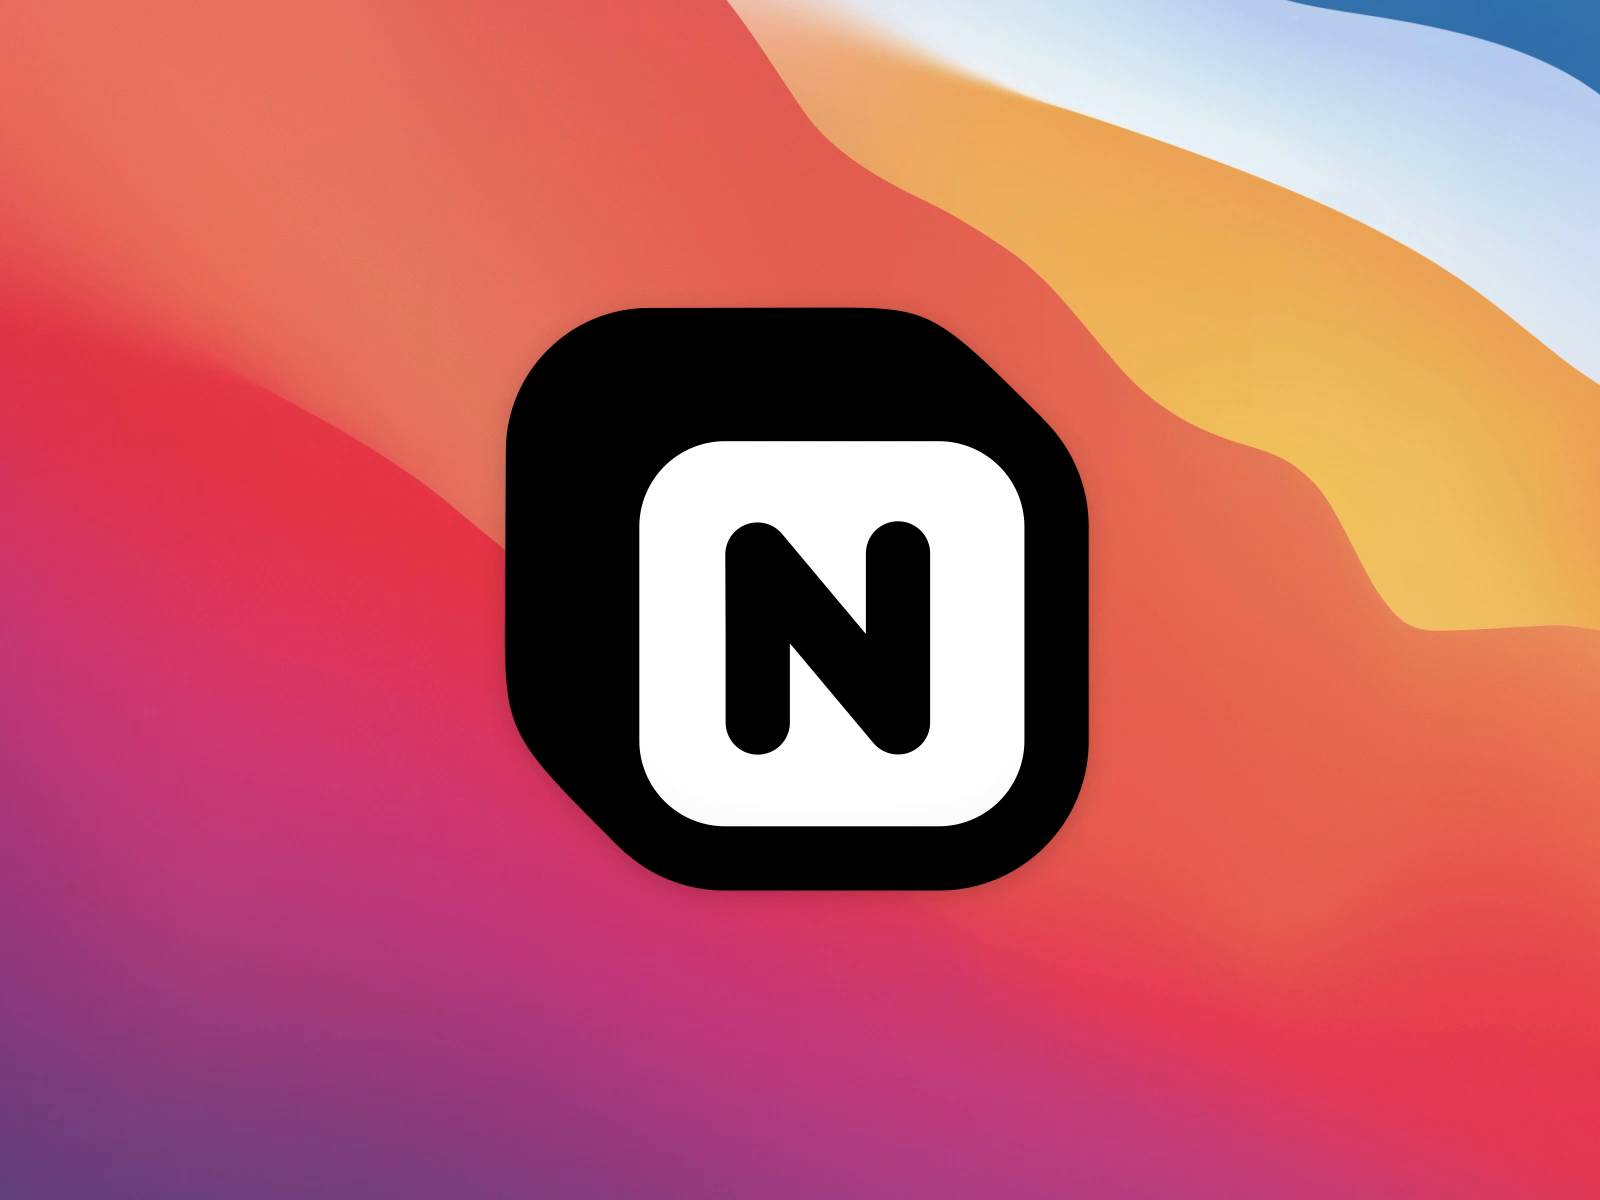 apps similar to notion